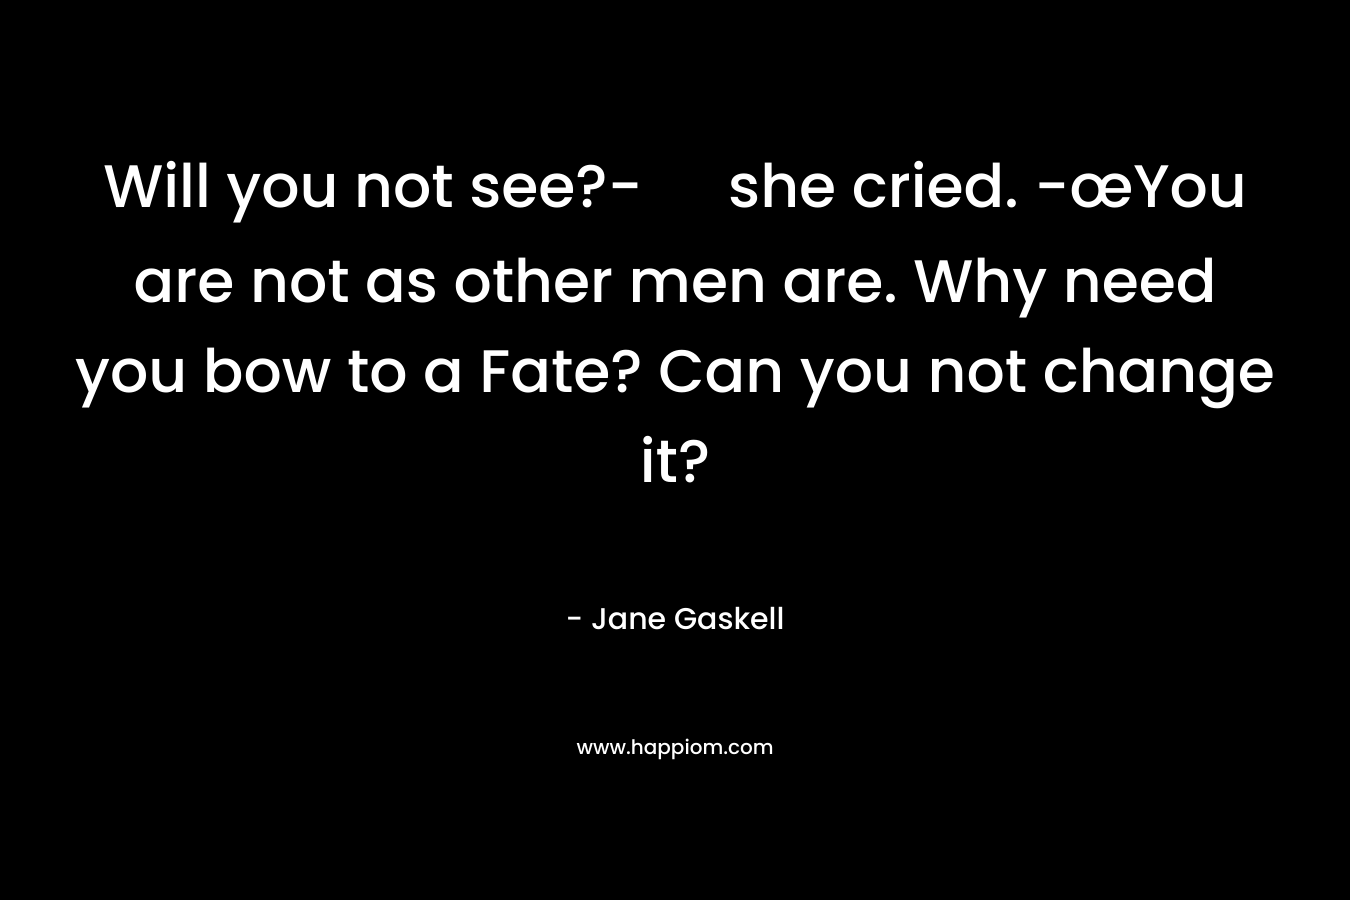 Will you not see?- she cried. -œYou are not as other men are. Why need you bow to a Fate? Can you not change it?